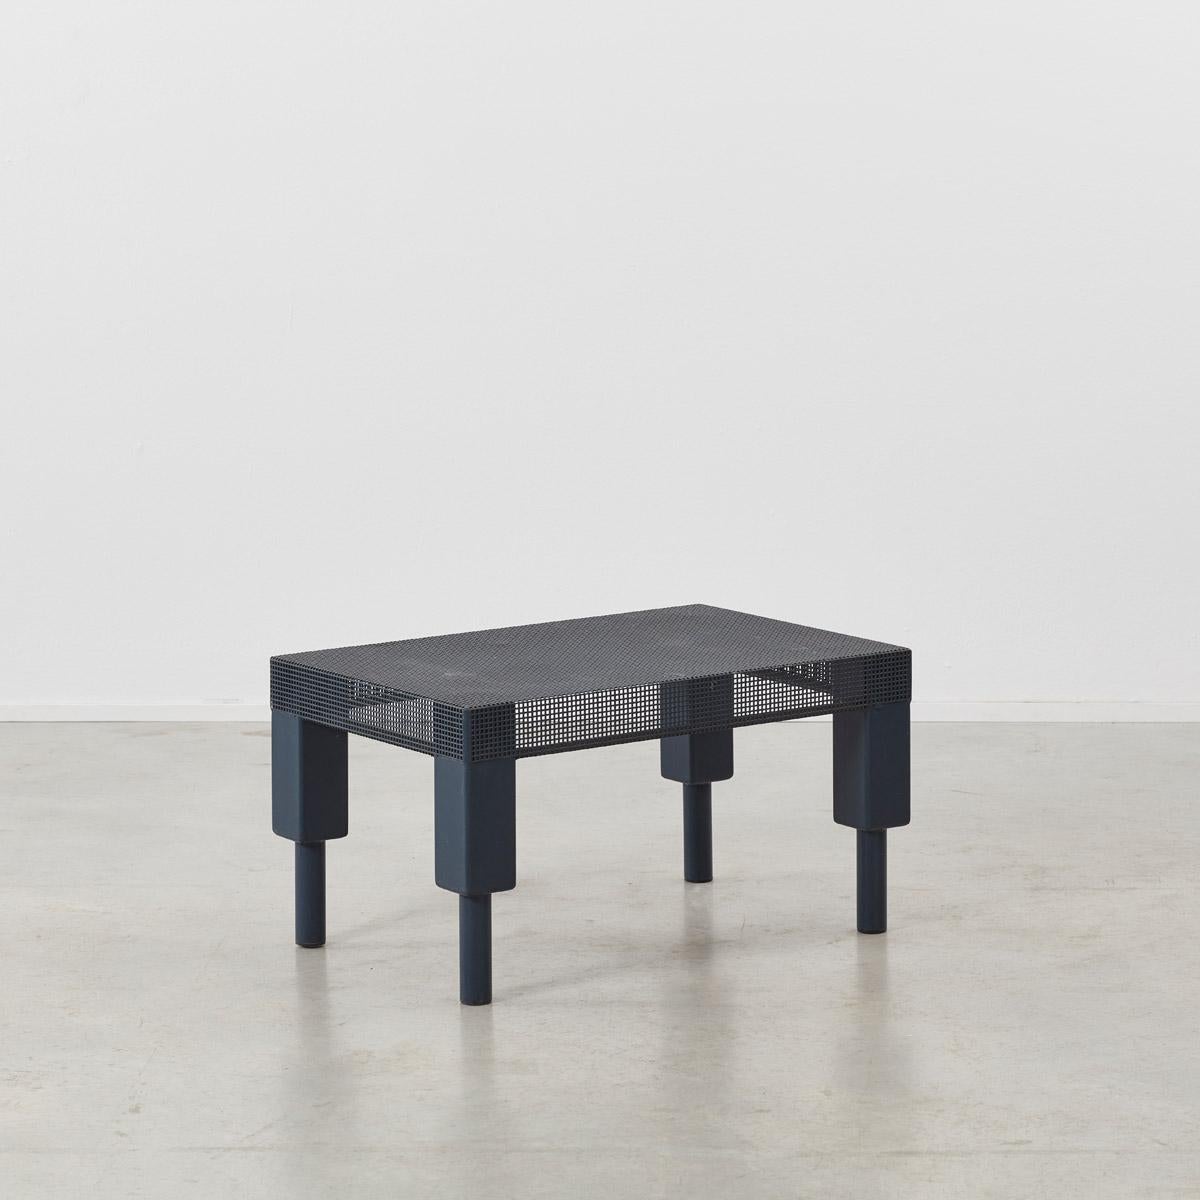 This Postmodern table is made from folded perforated metal sheeting, in a dark matte blue paint. The table has considerable strength and can be used as a side table or a small coffee table. The piece is in good structural condition with minor